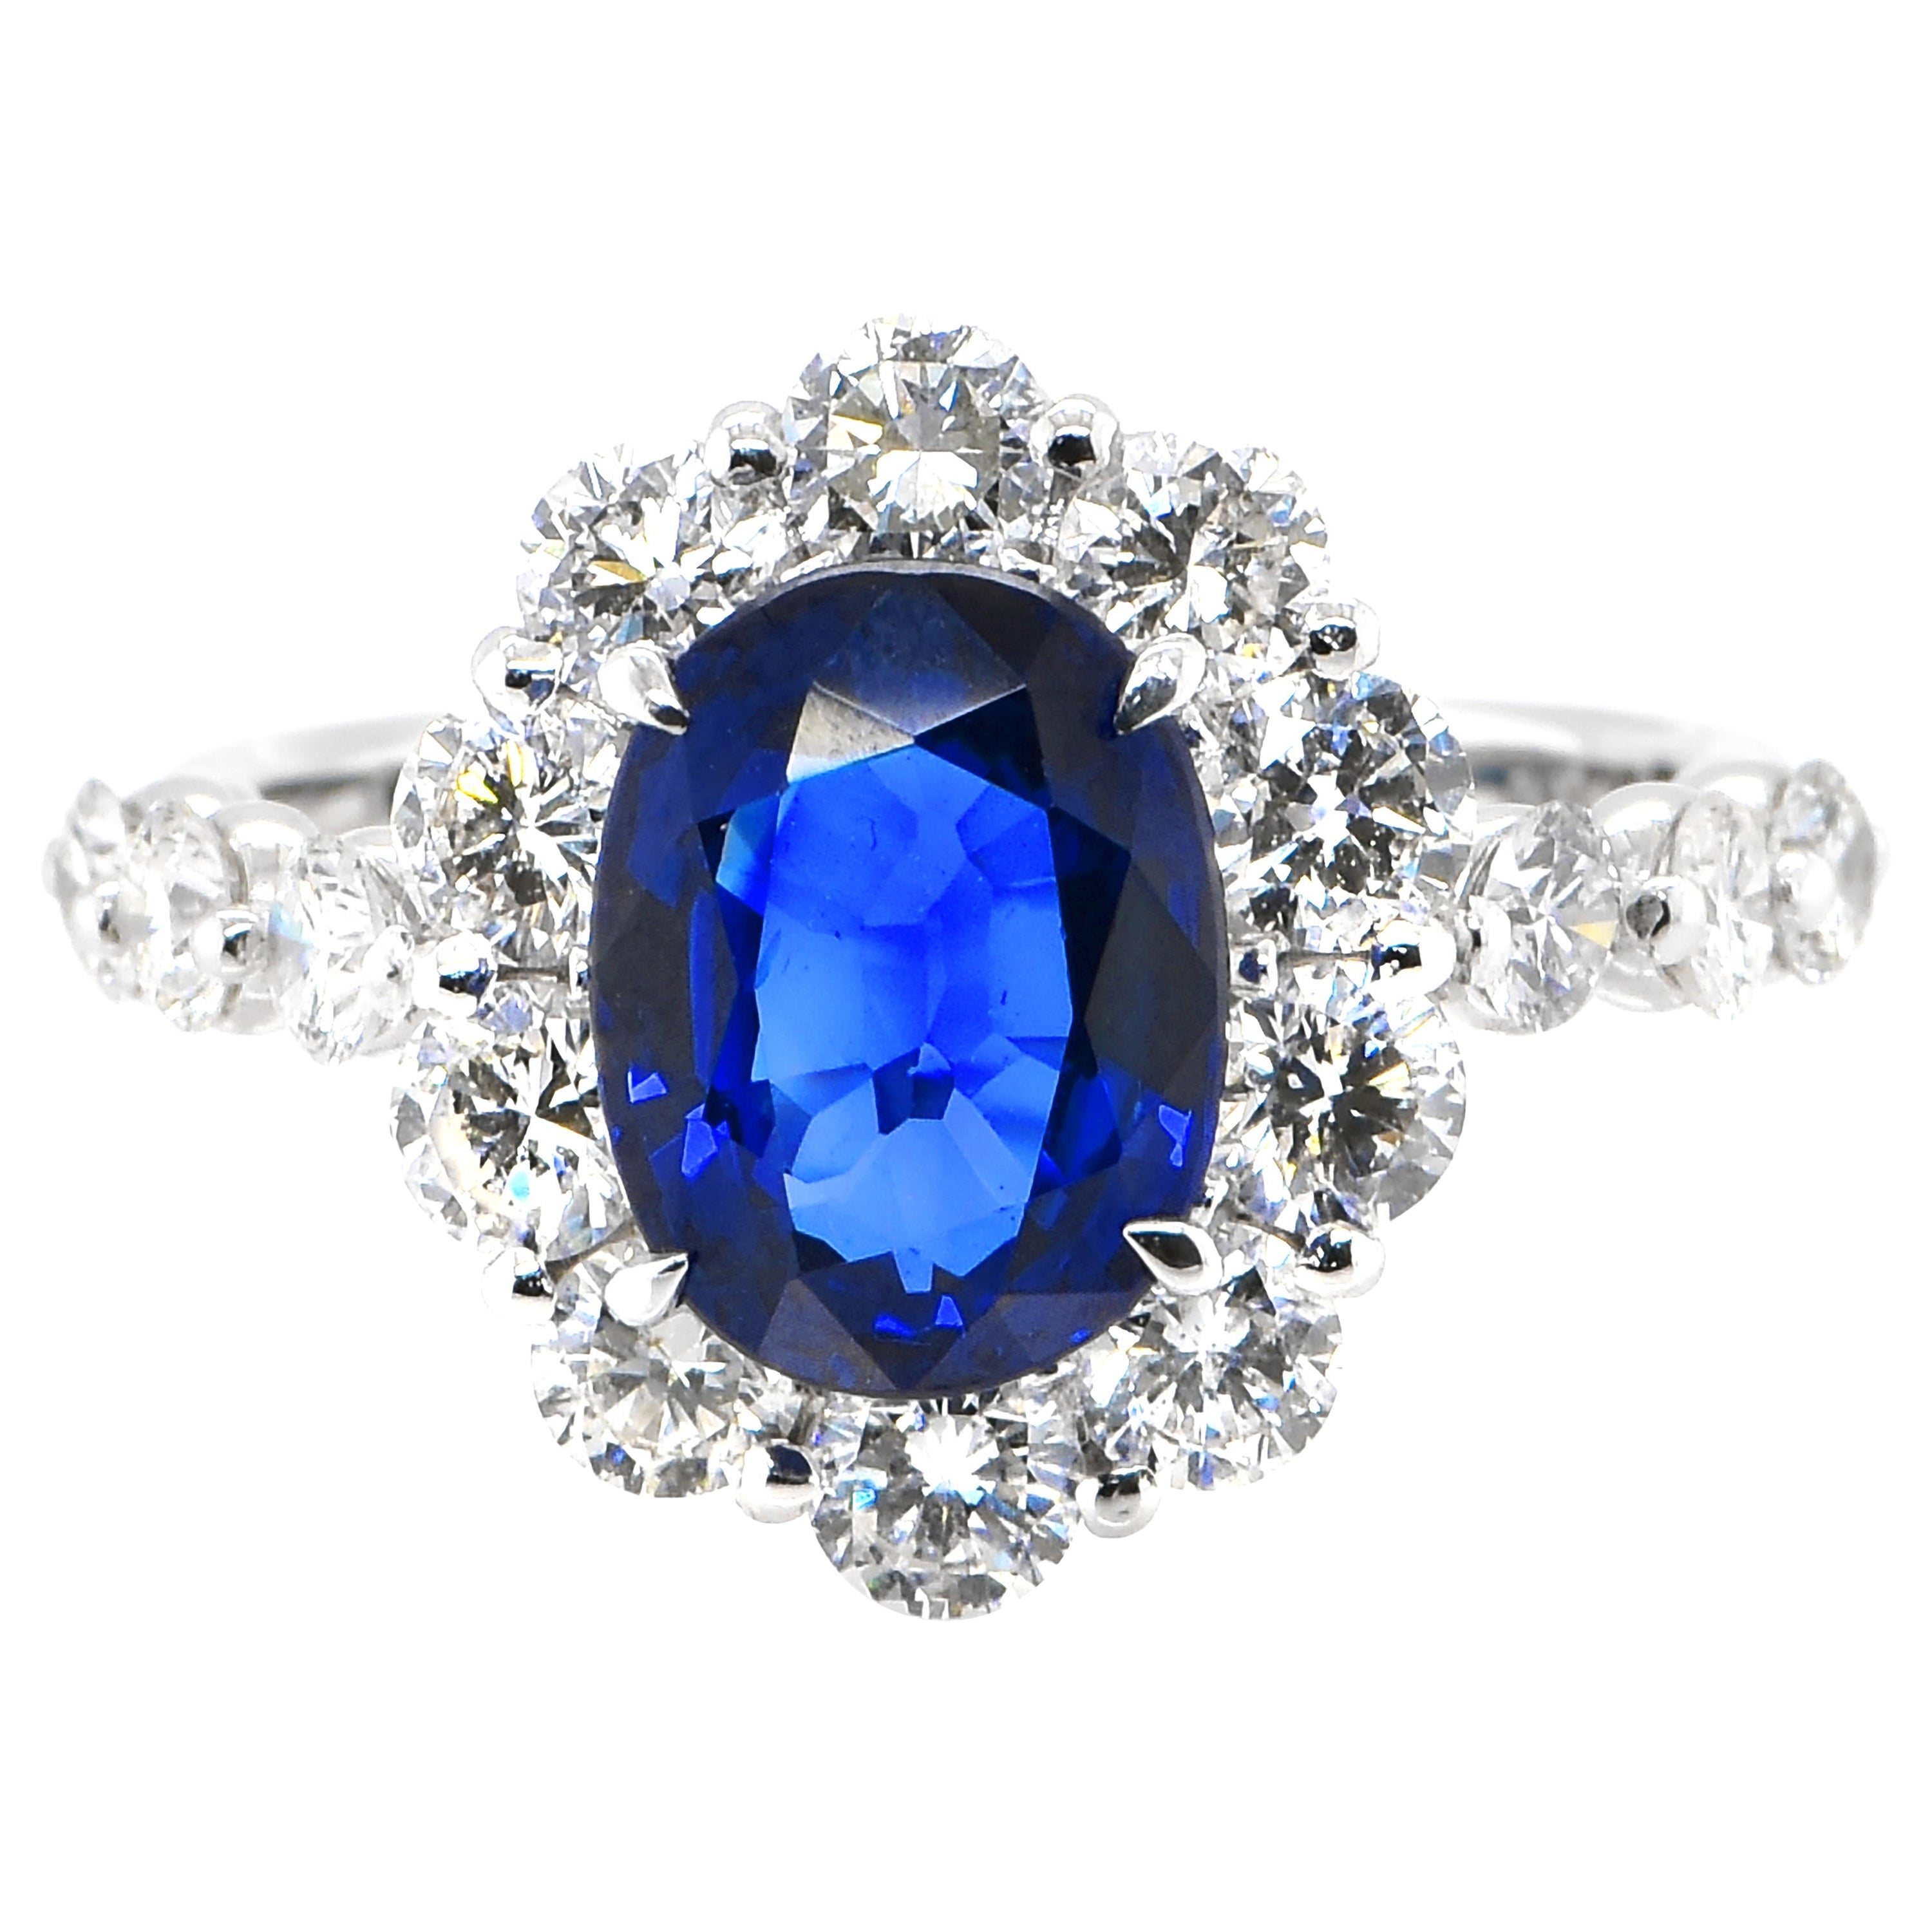 2.95 Carat Natural Royal Blue Sapphire and Diamond Halo Ring Made in Platinum For Sale